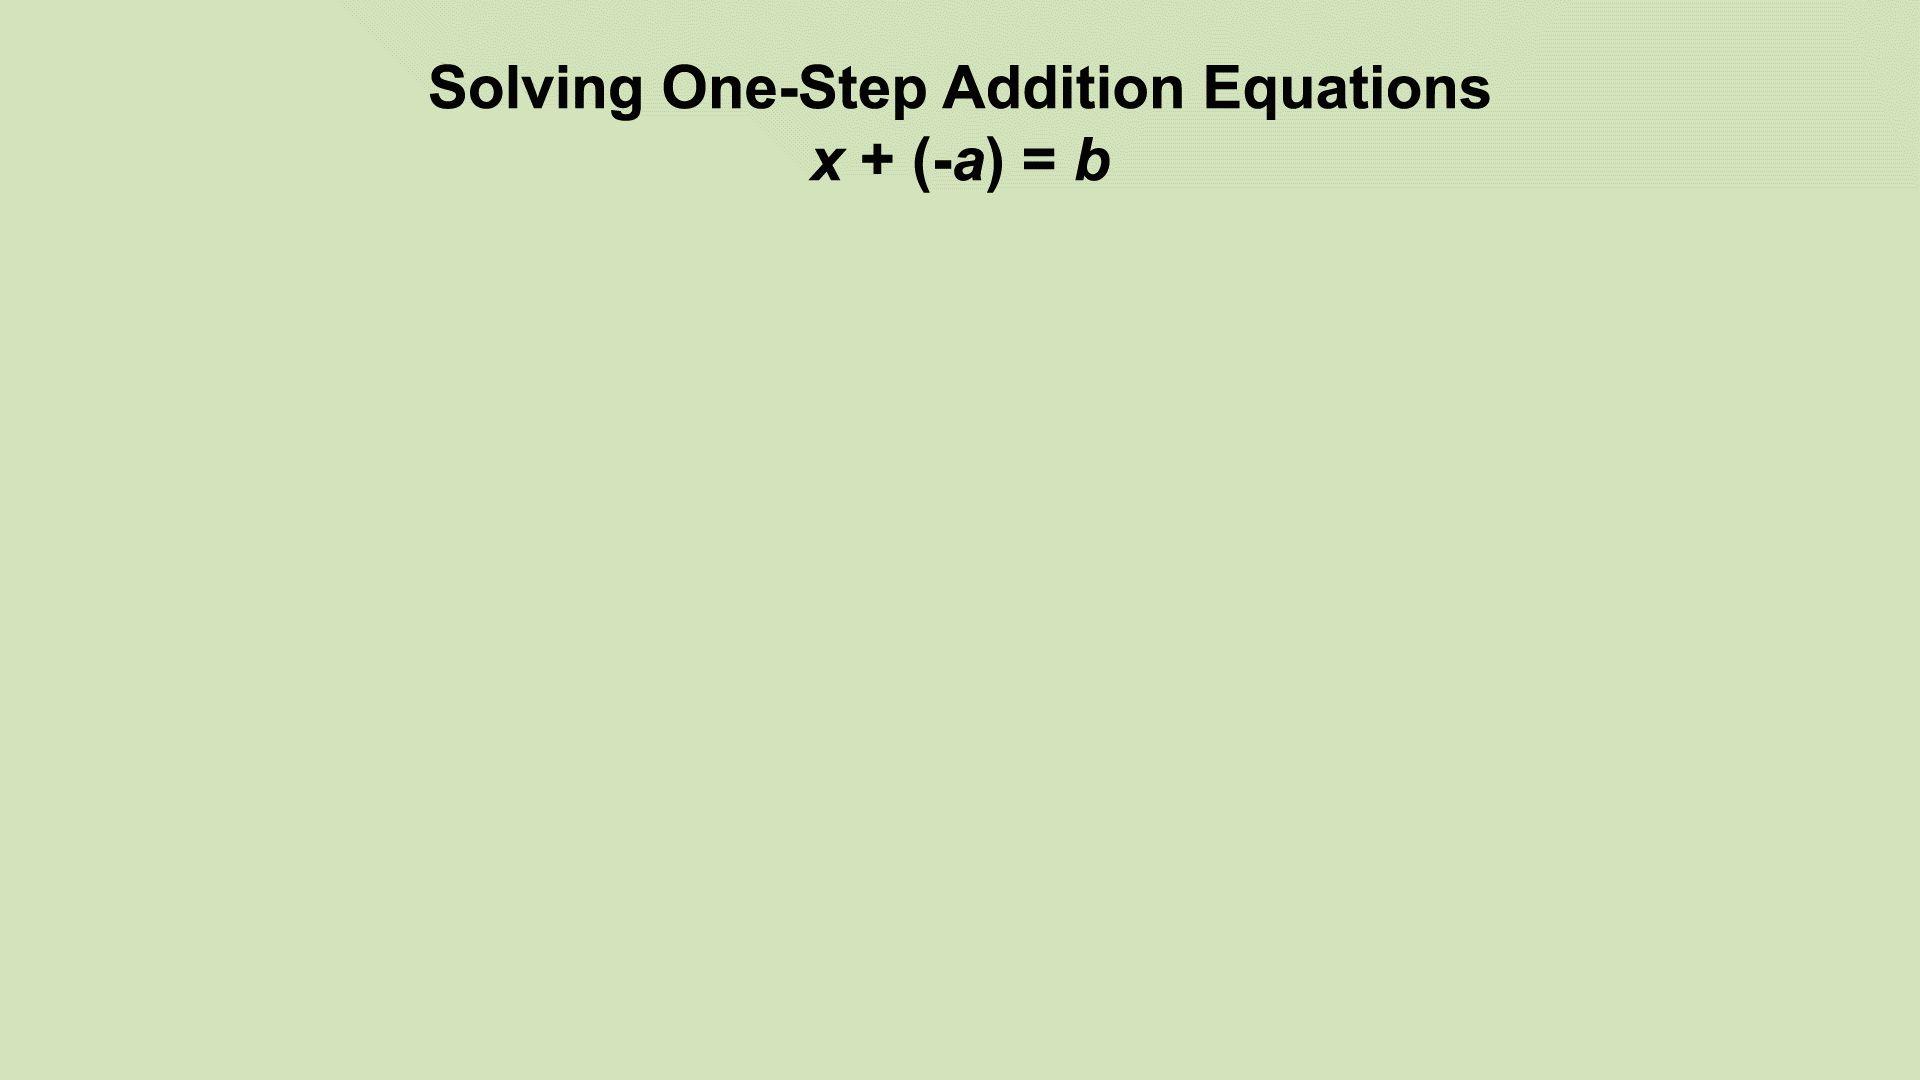 In this example the one-step equation shows addition of a negative number.